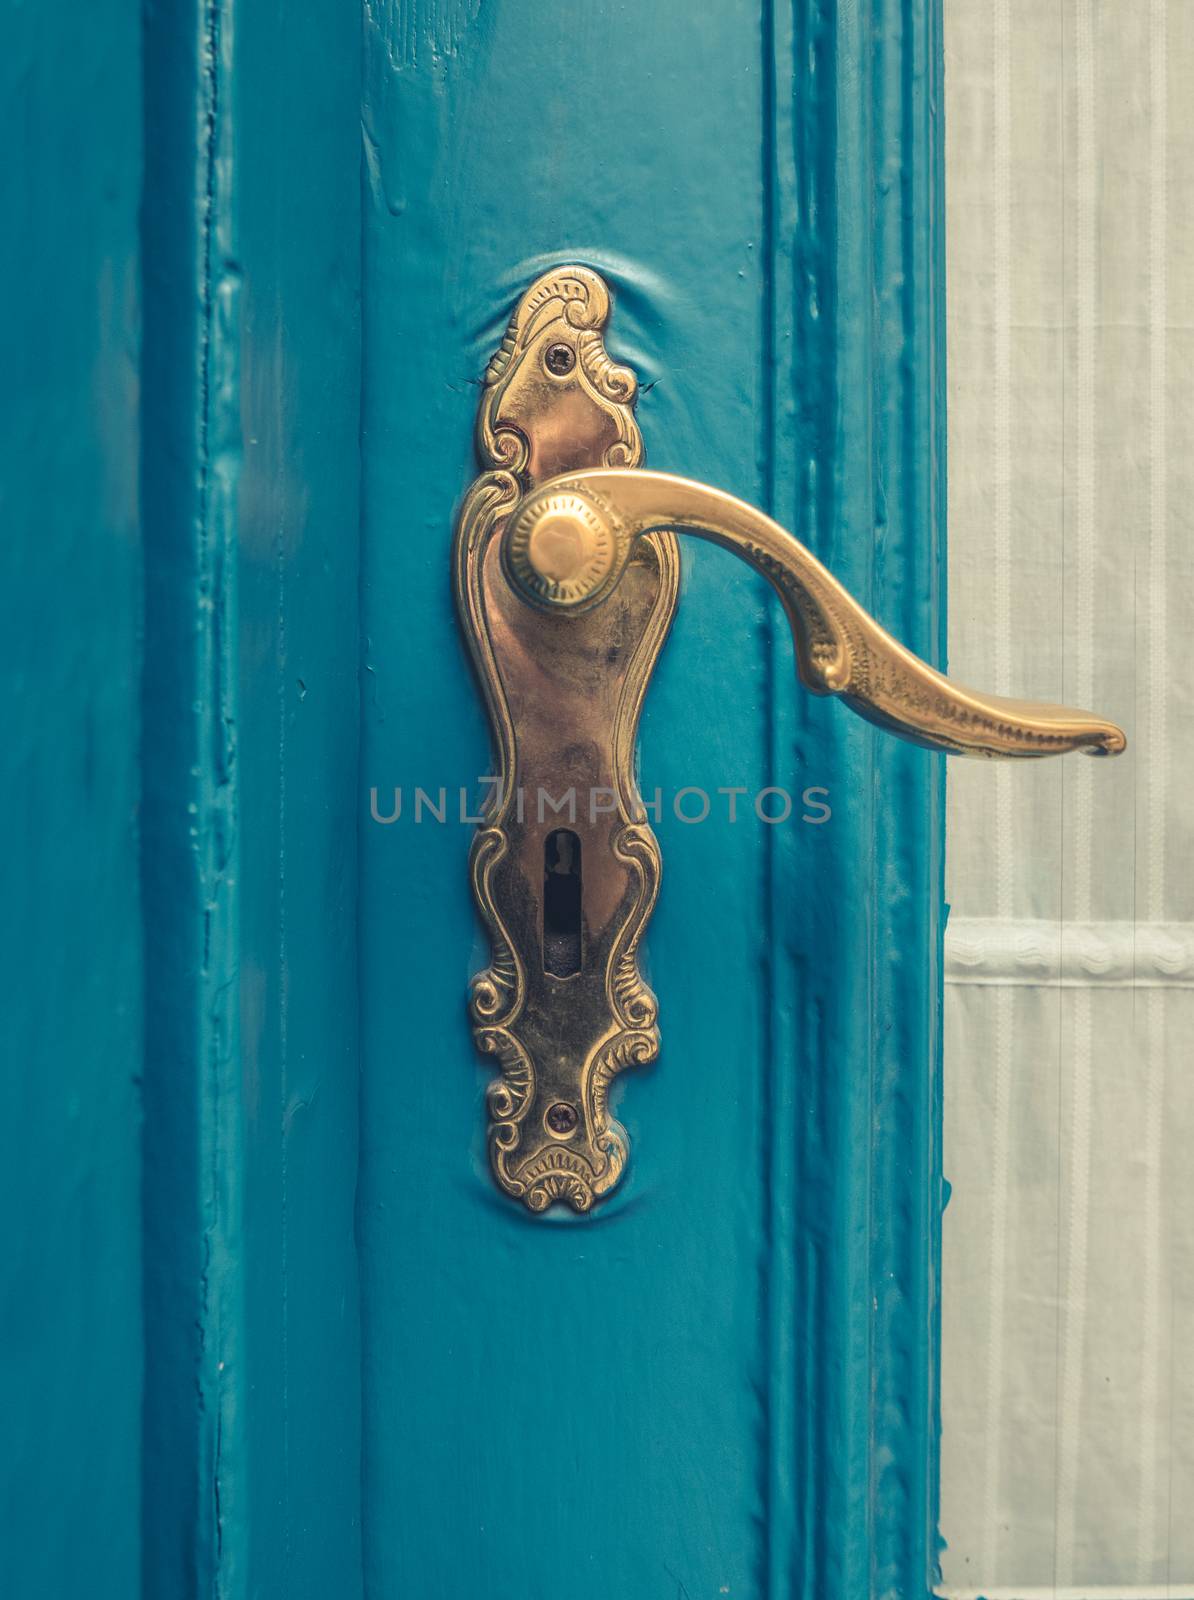 Architectural Detail Of A Vintage Brass Door Handle On A Blue Painted Door